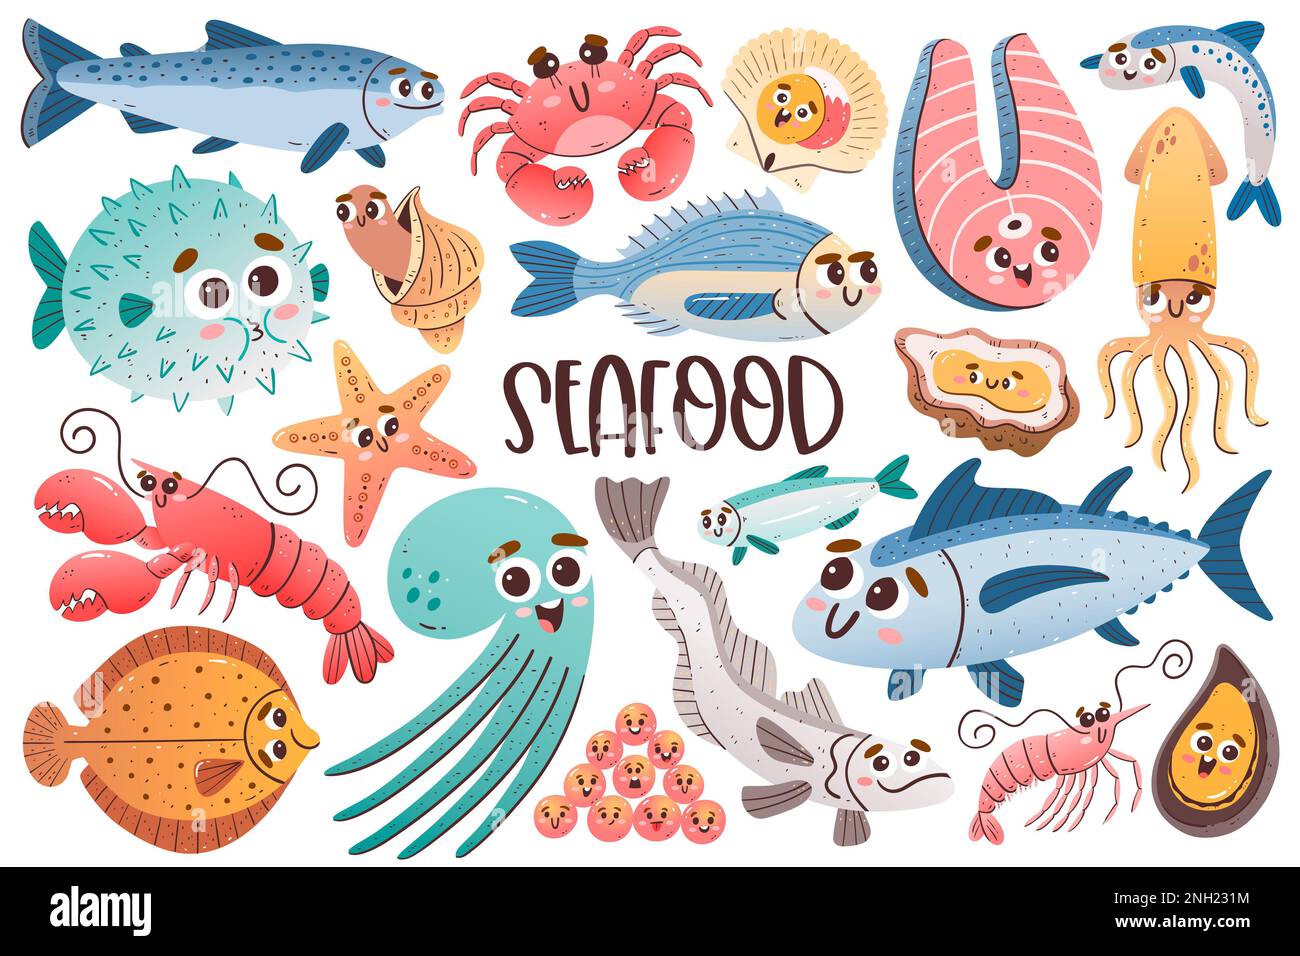 Seafood collection with cute cartoon faces. Isolated colorful cliparts. Background illustration. Stock Photo